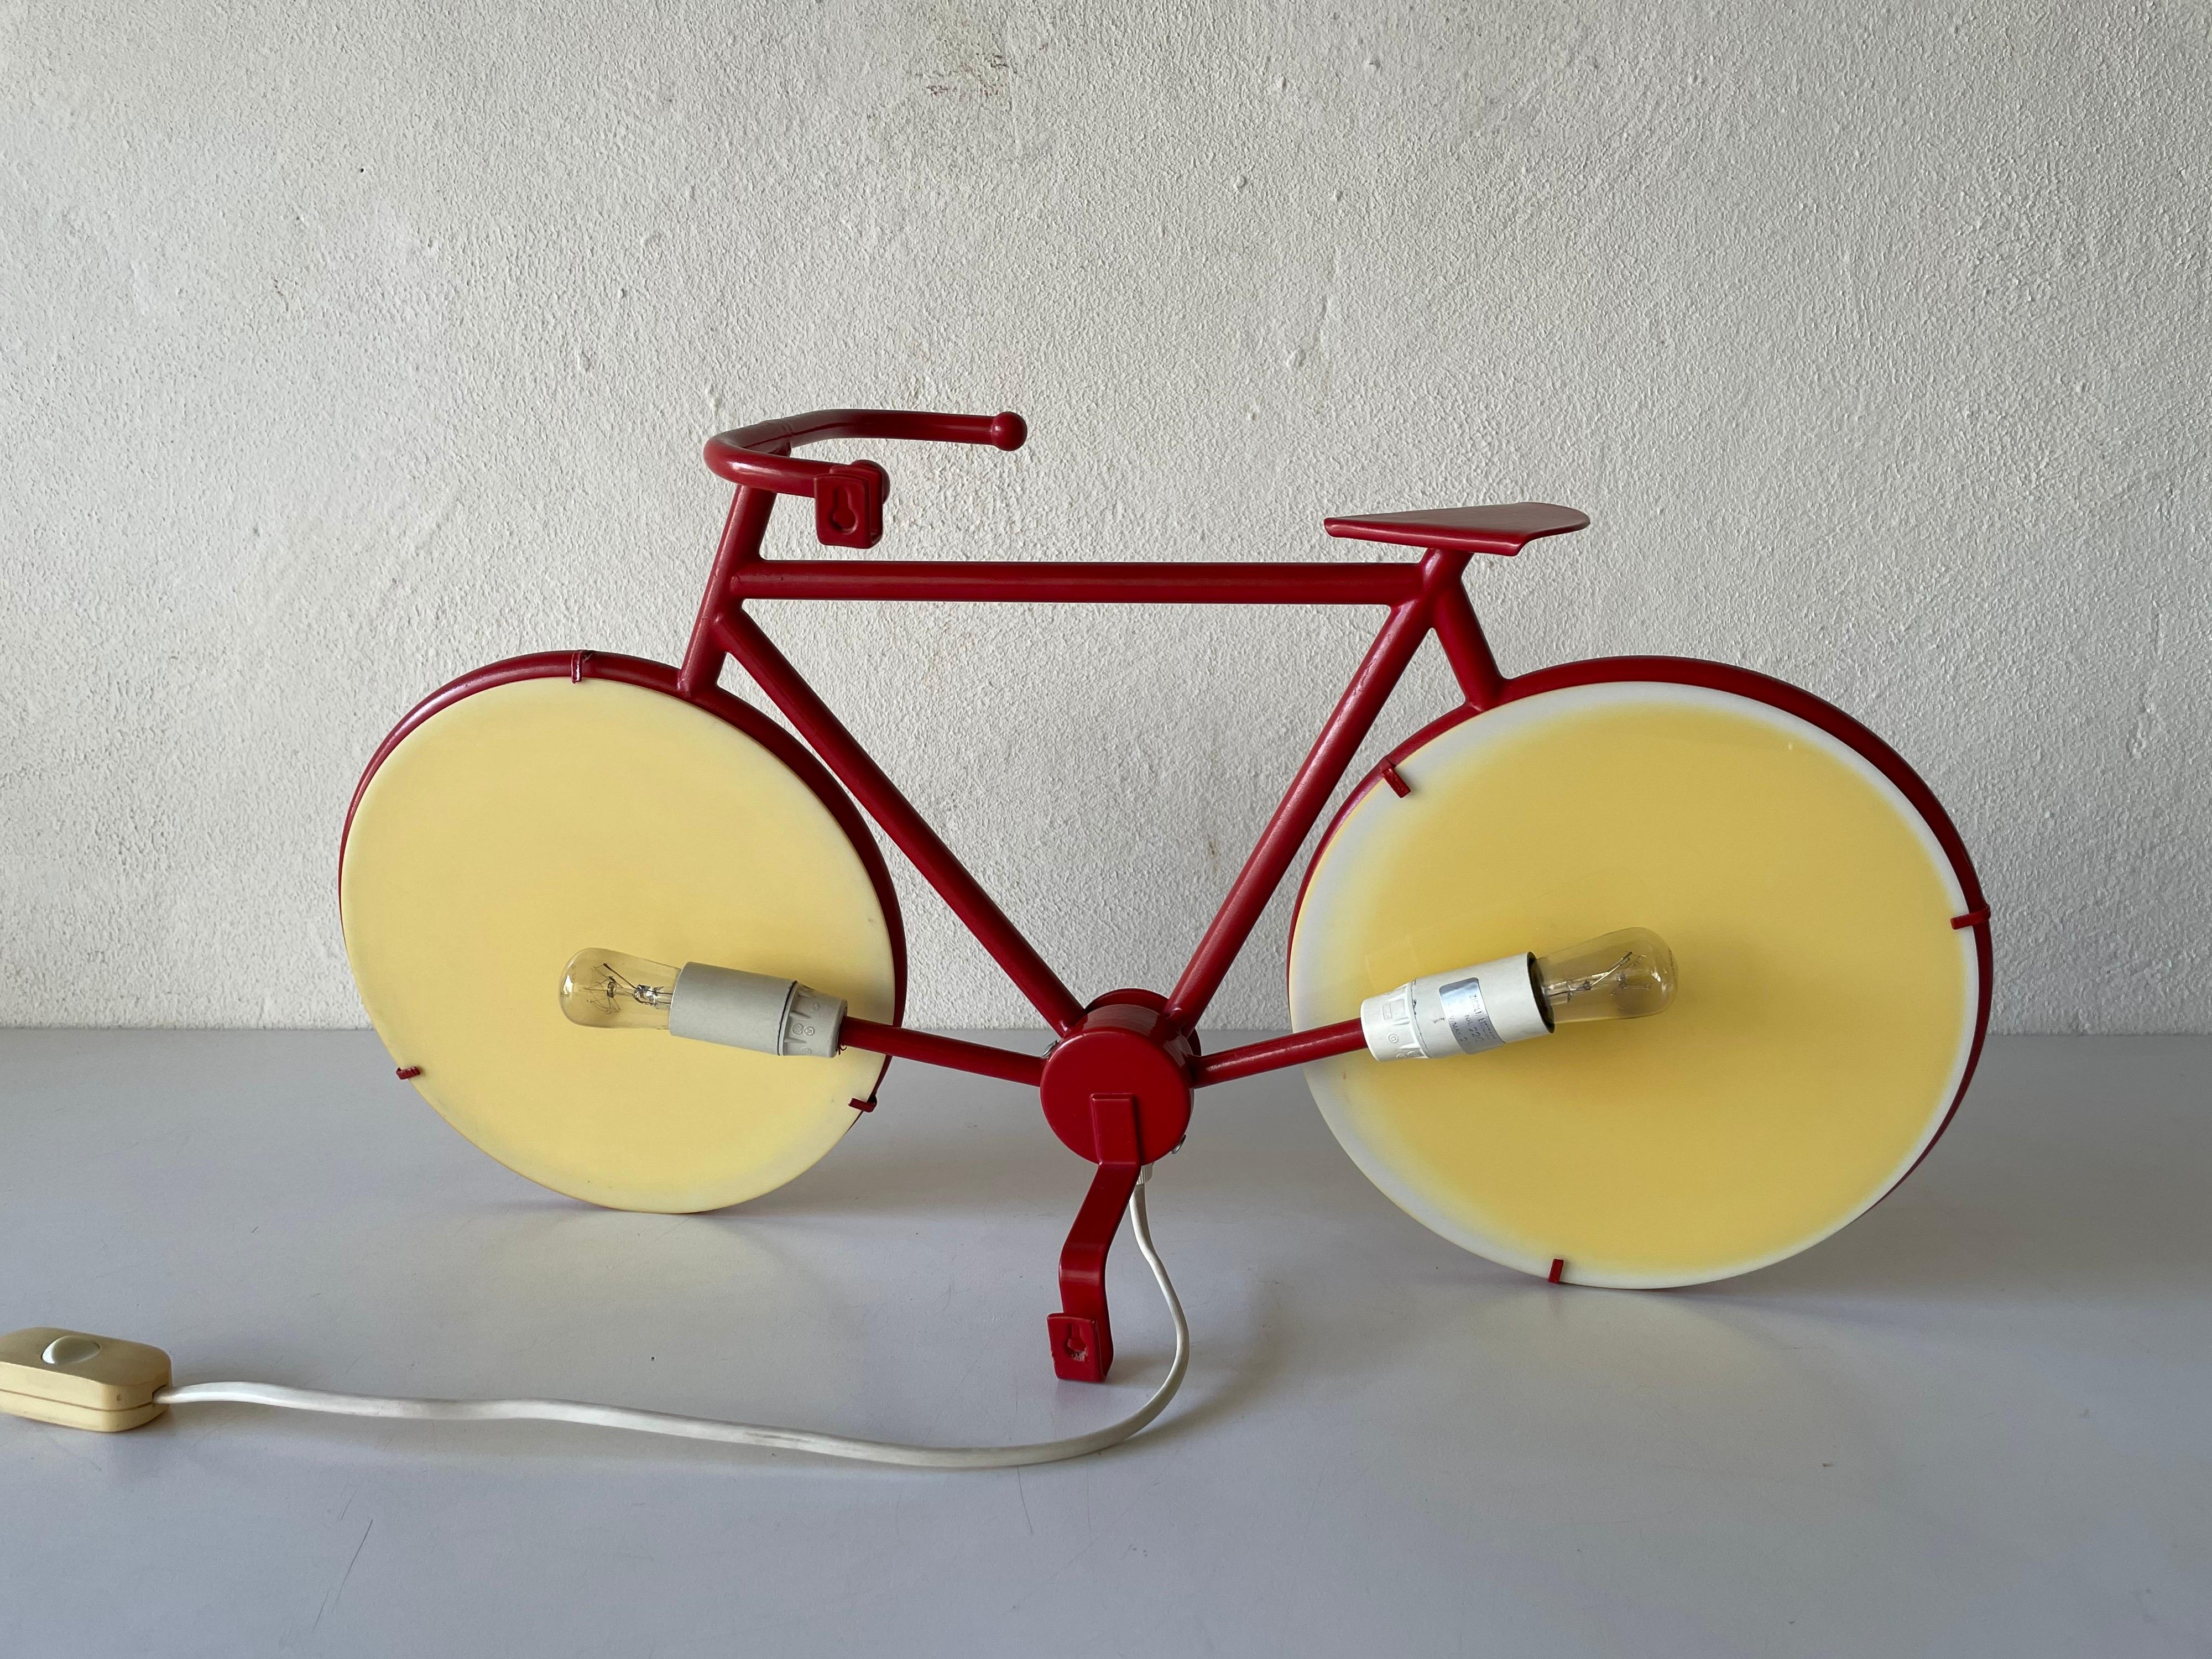 Italian Red Metal Bicycle Table Lamp or Wall Lamp by Zicoli, 1970s, Italy For Sale